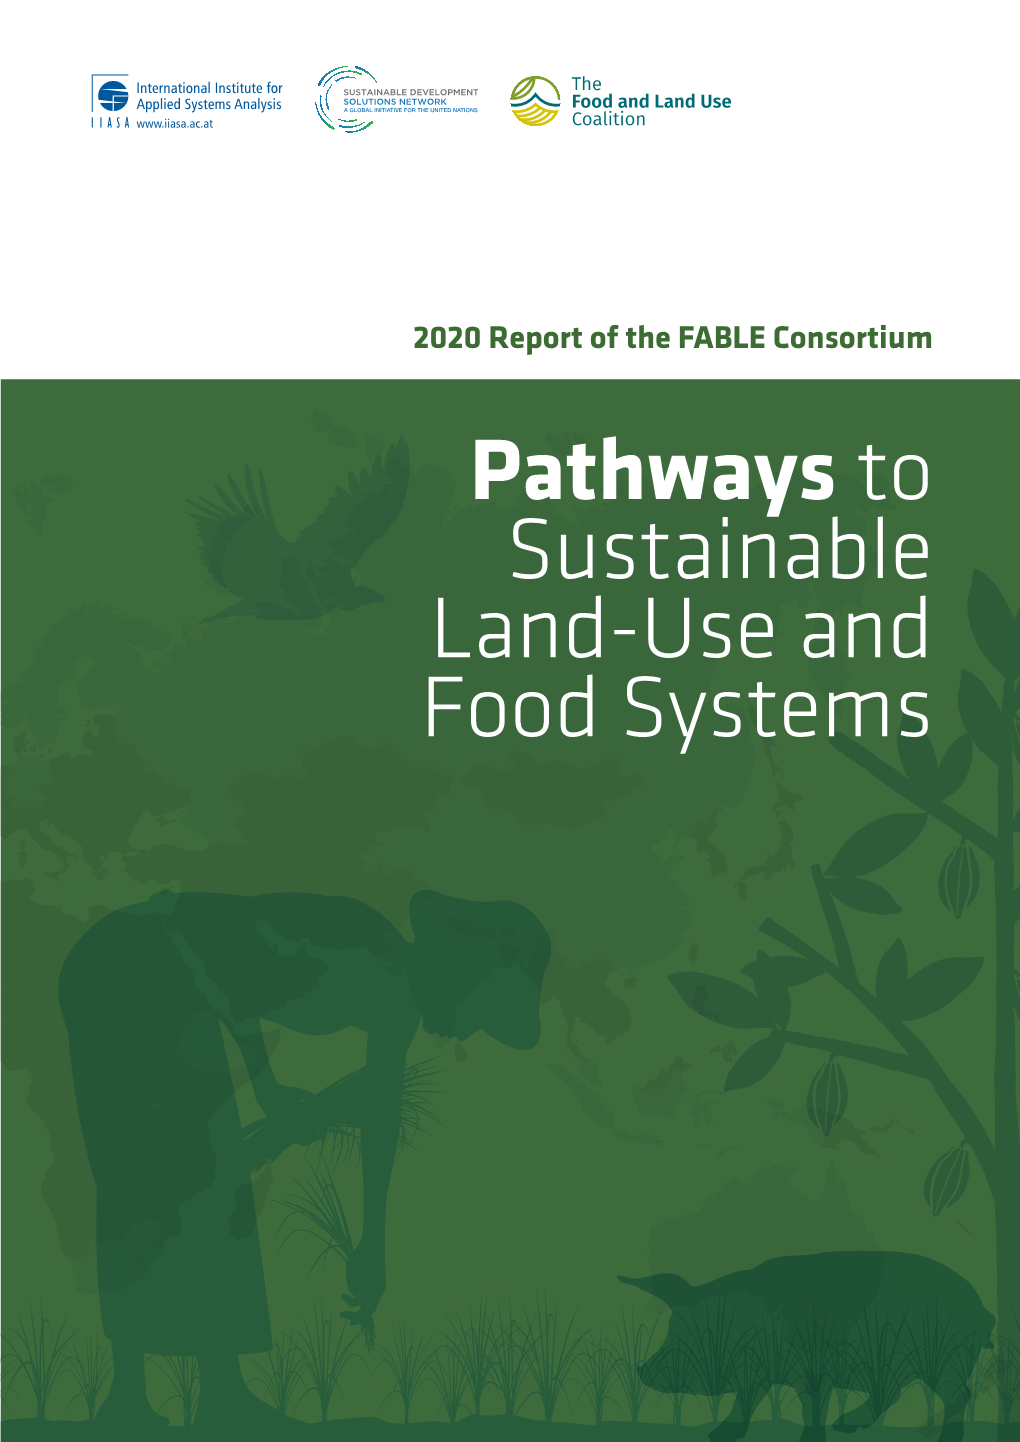 Argentina by 2050” In: FABLE 2020, Pathways to Sustainable Land-Use and Food Systems, 2020 Report of the FABLE Consortium